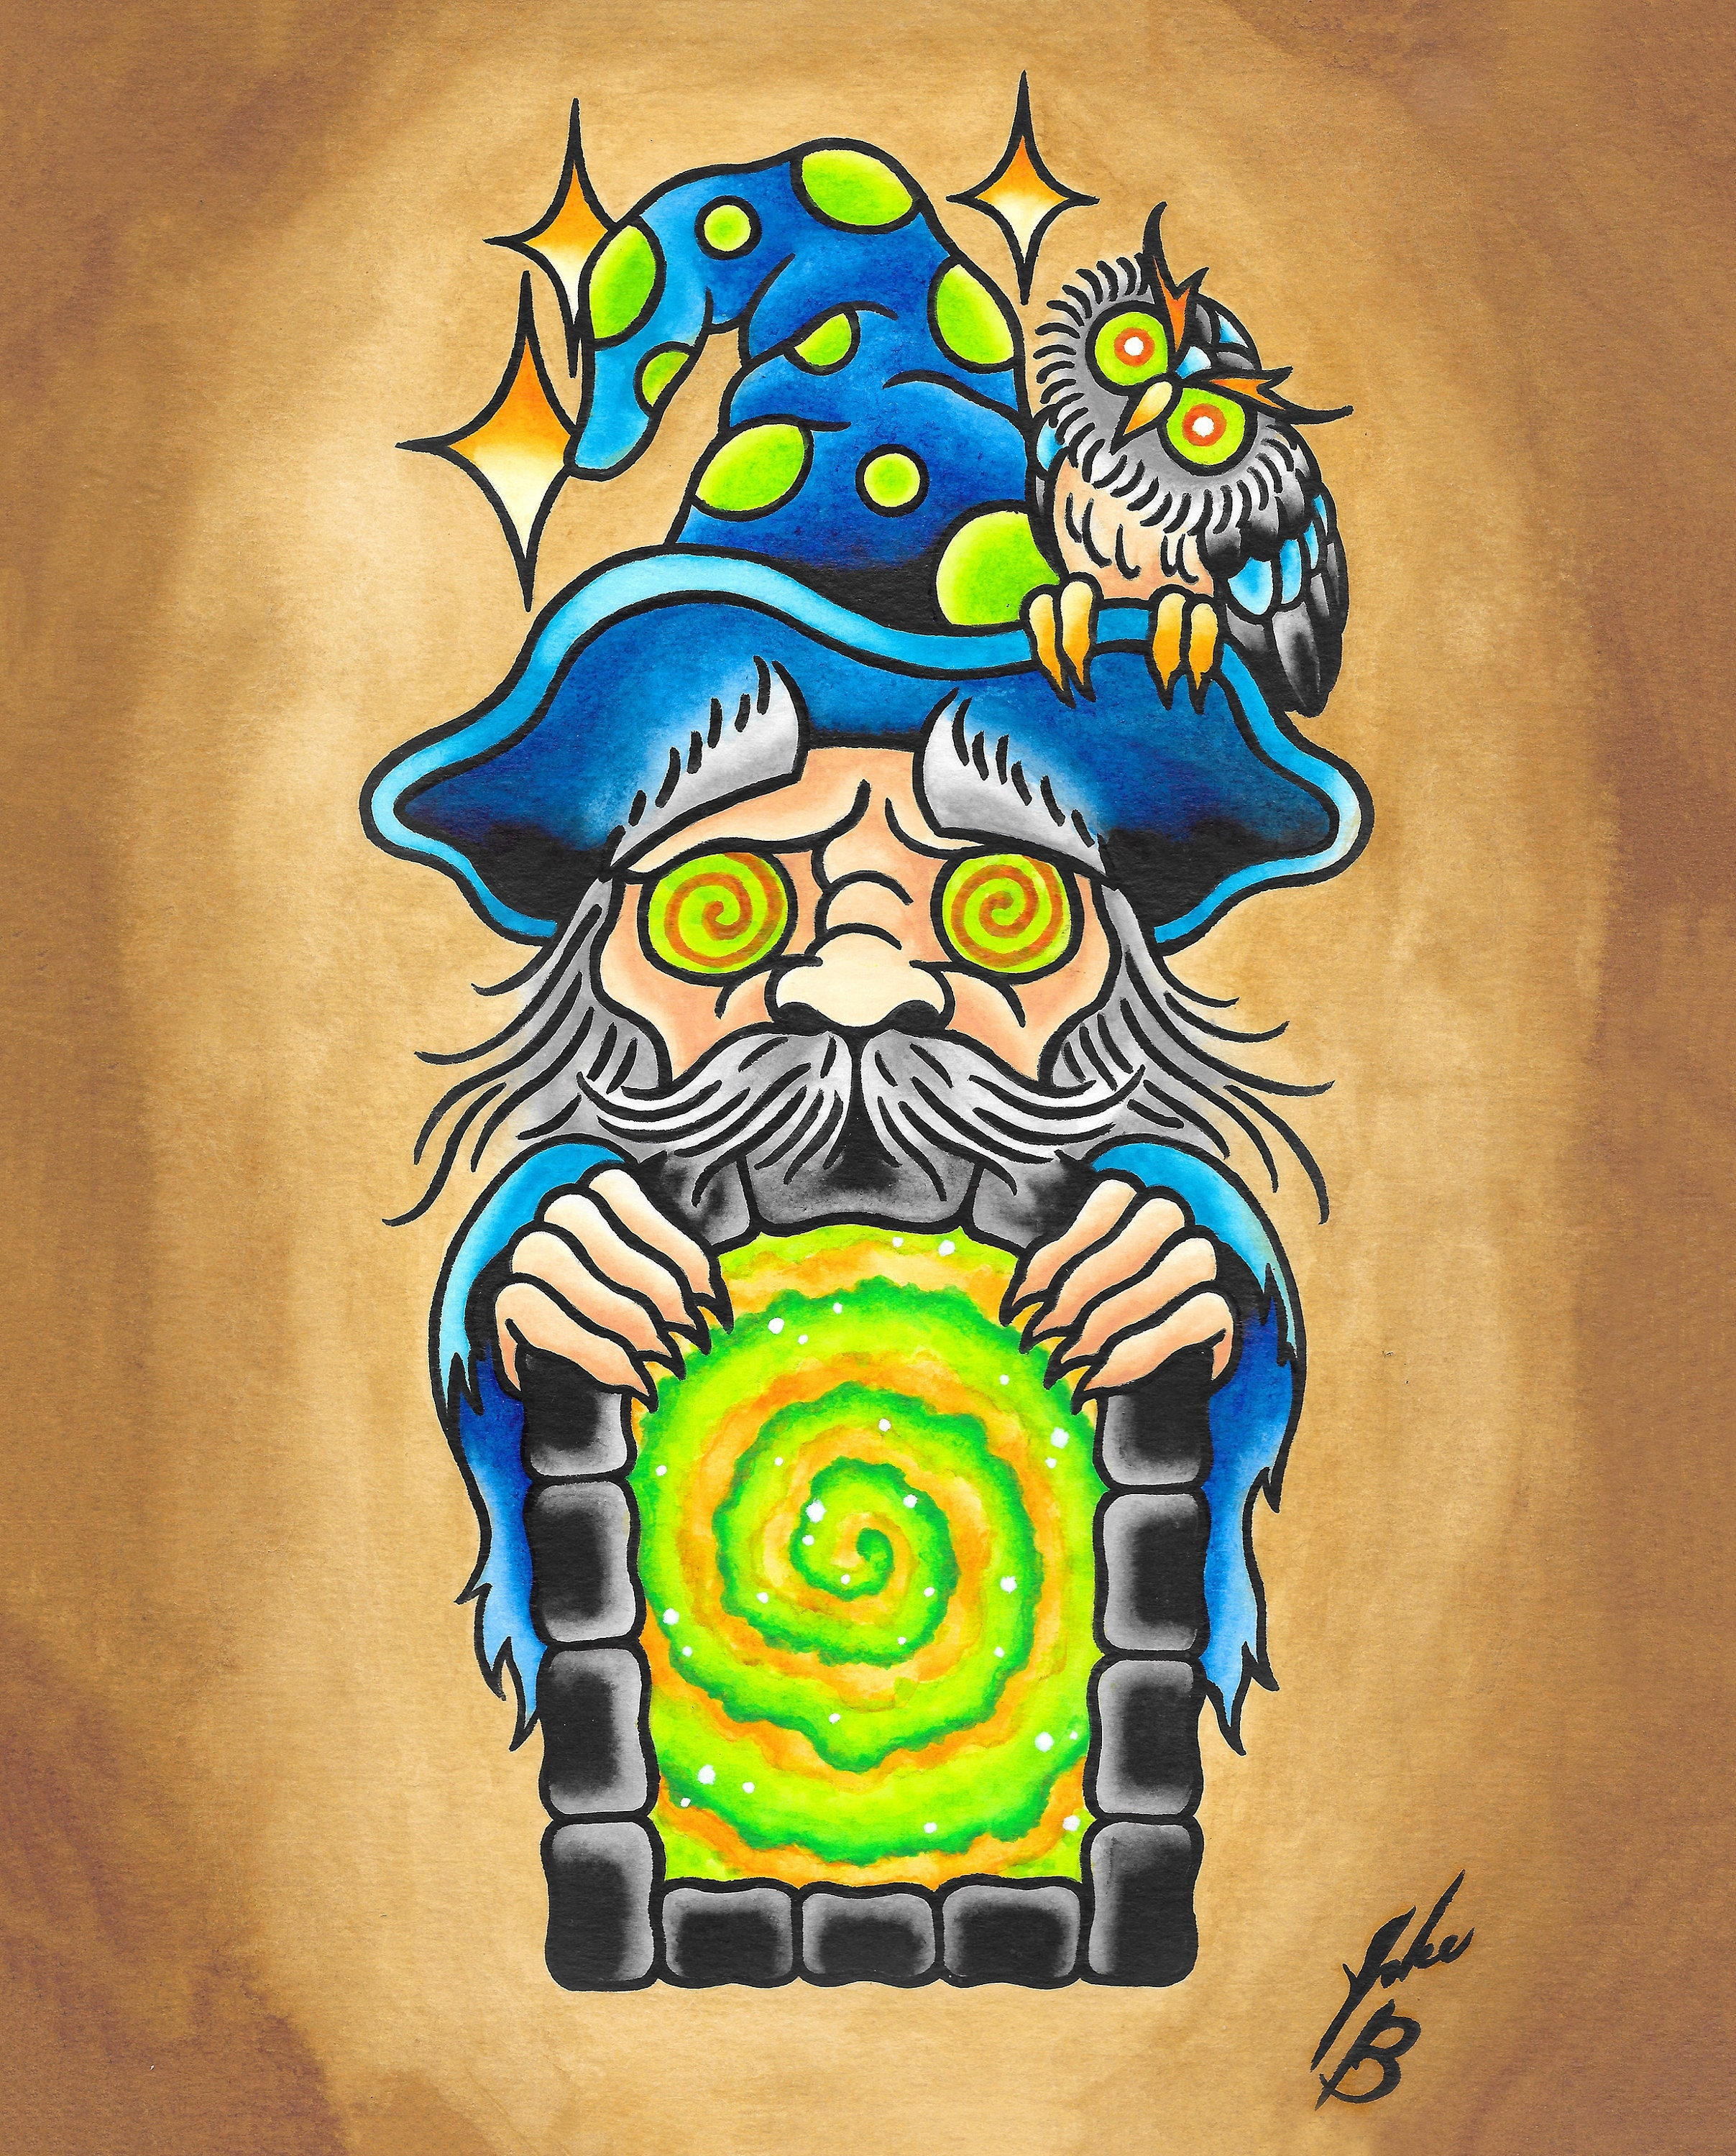 Wise Wizard Old School Tattoo Design  Stretched Canvas  Diblis Artist  Shop